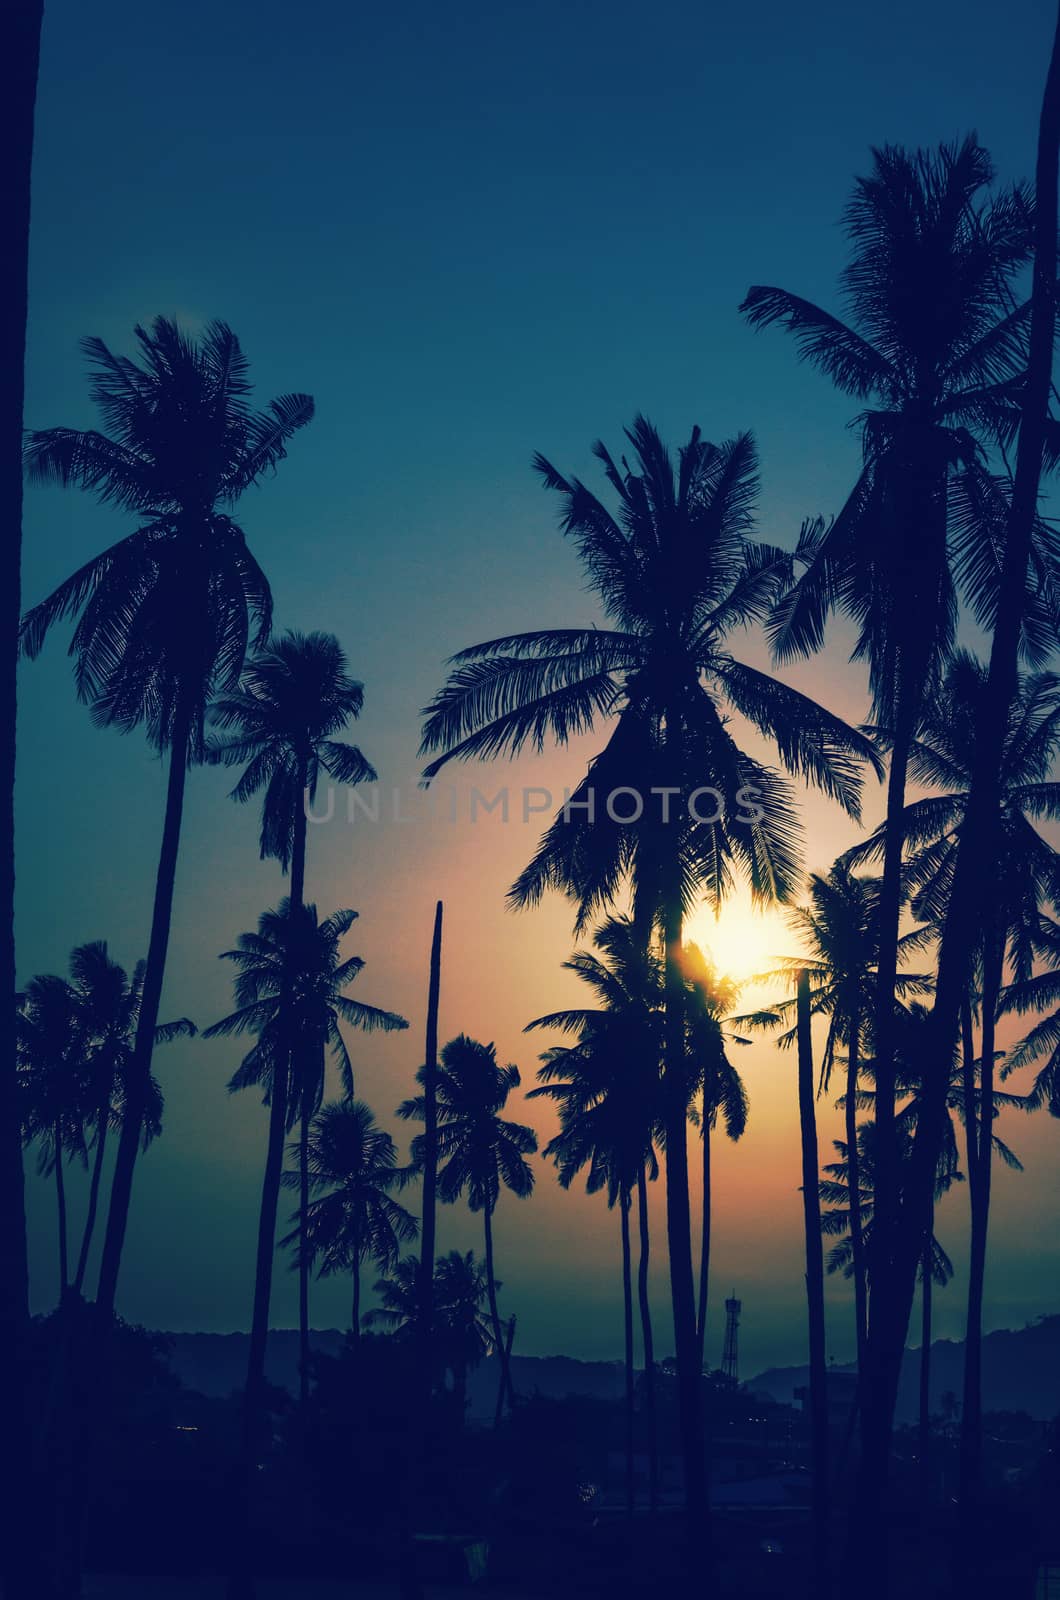 Coconut palms Vintage on the beautiful sunset background.